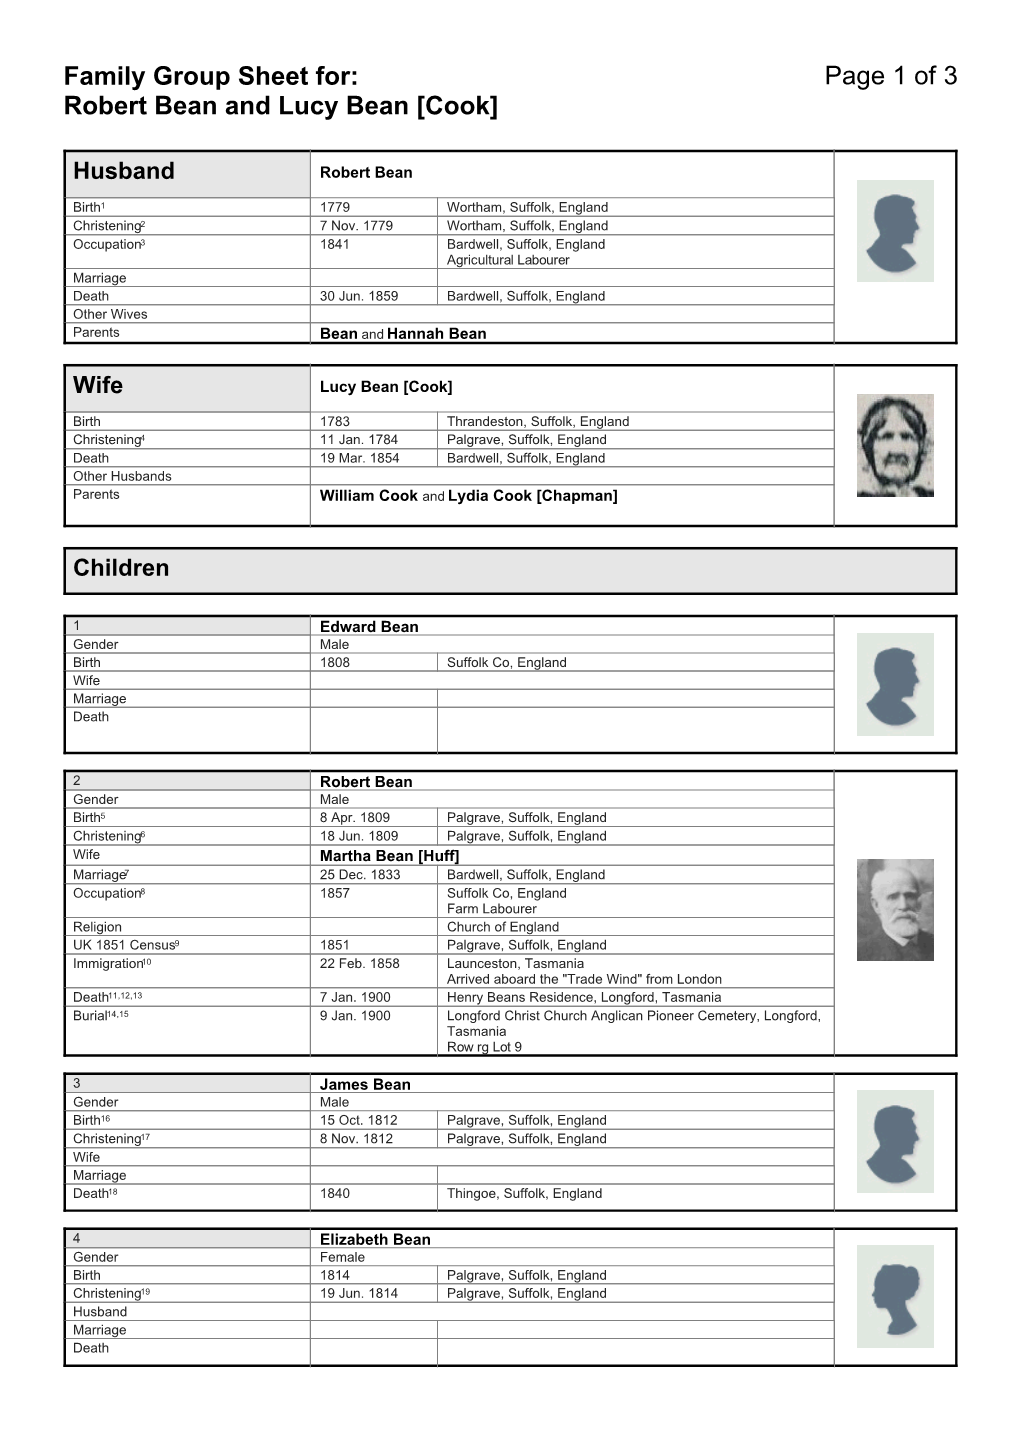 Family Group Sheet of Robert Bean and Lucy Bean [Cook]